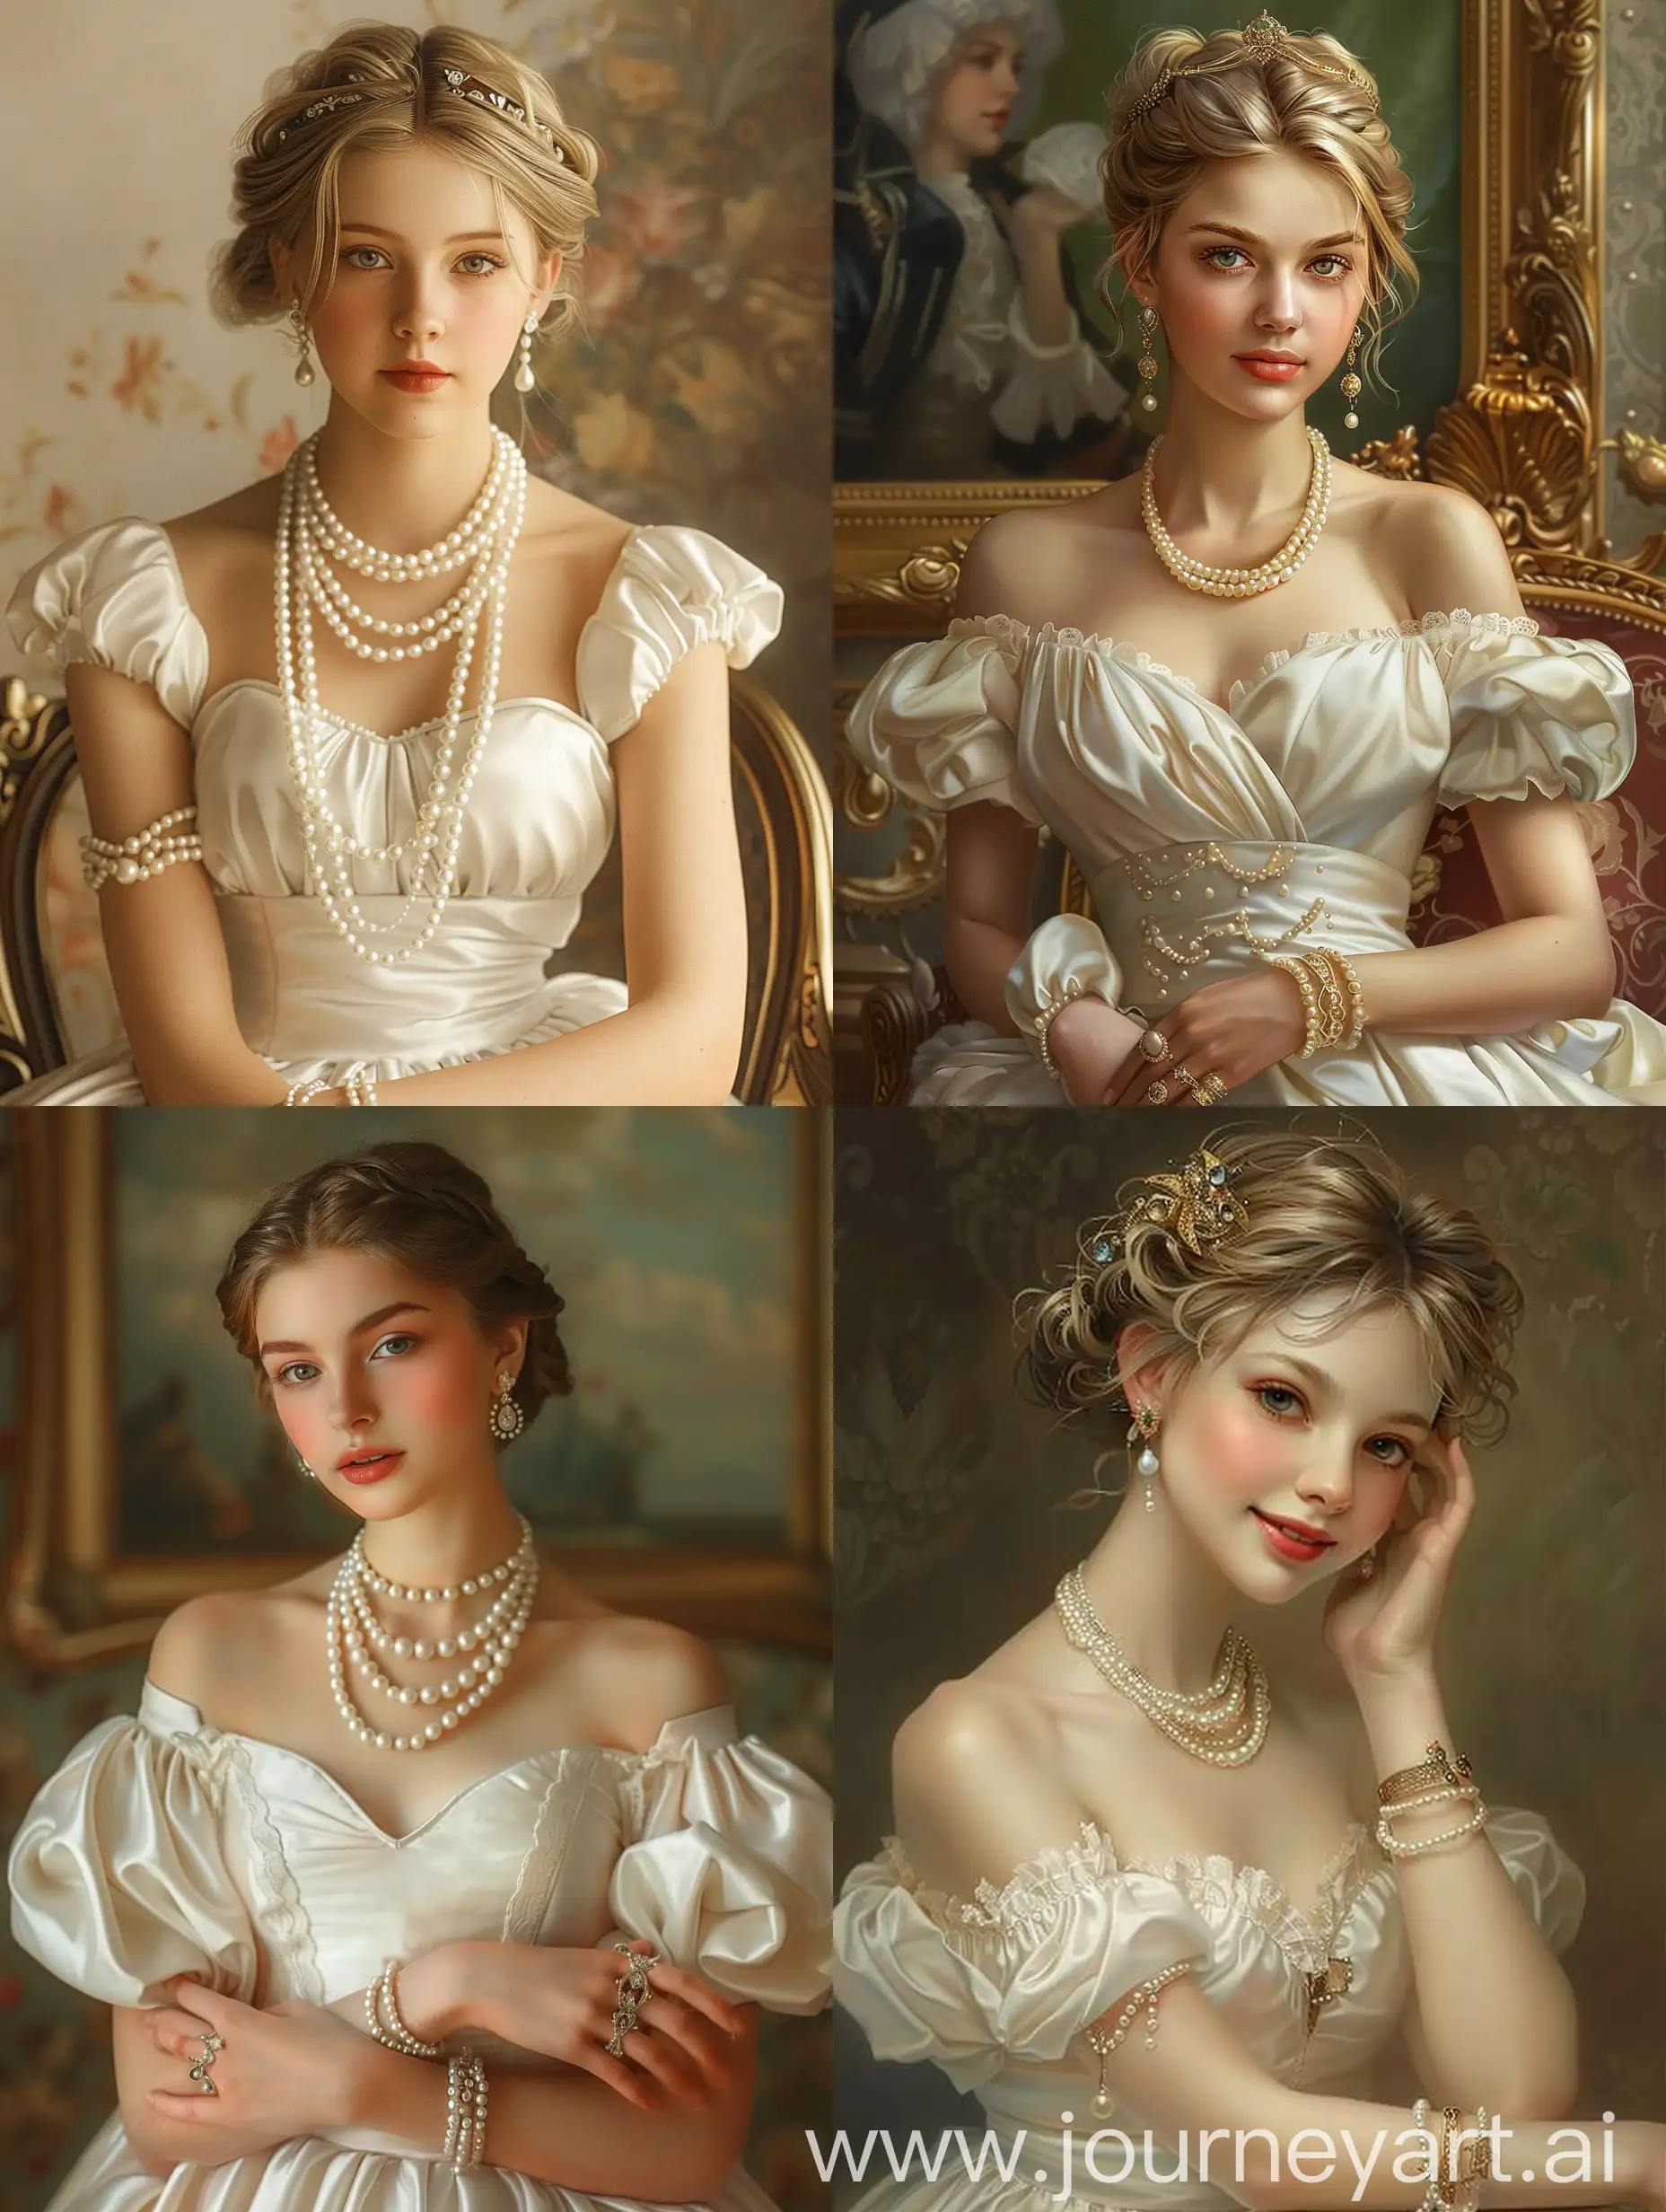 Elegant-European-Noble-Girl-in-White-Silk-Dress-with-Pearl-Accessories-Vintage-Oil-Painting-Style